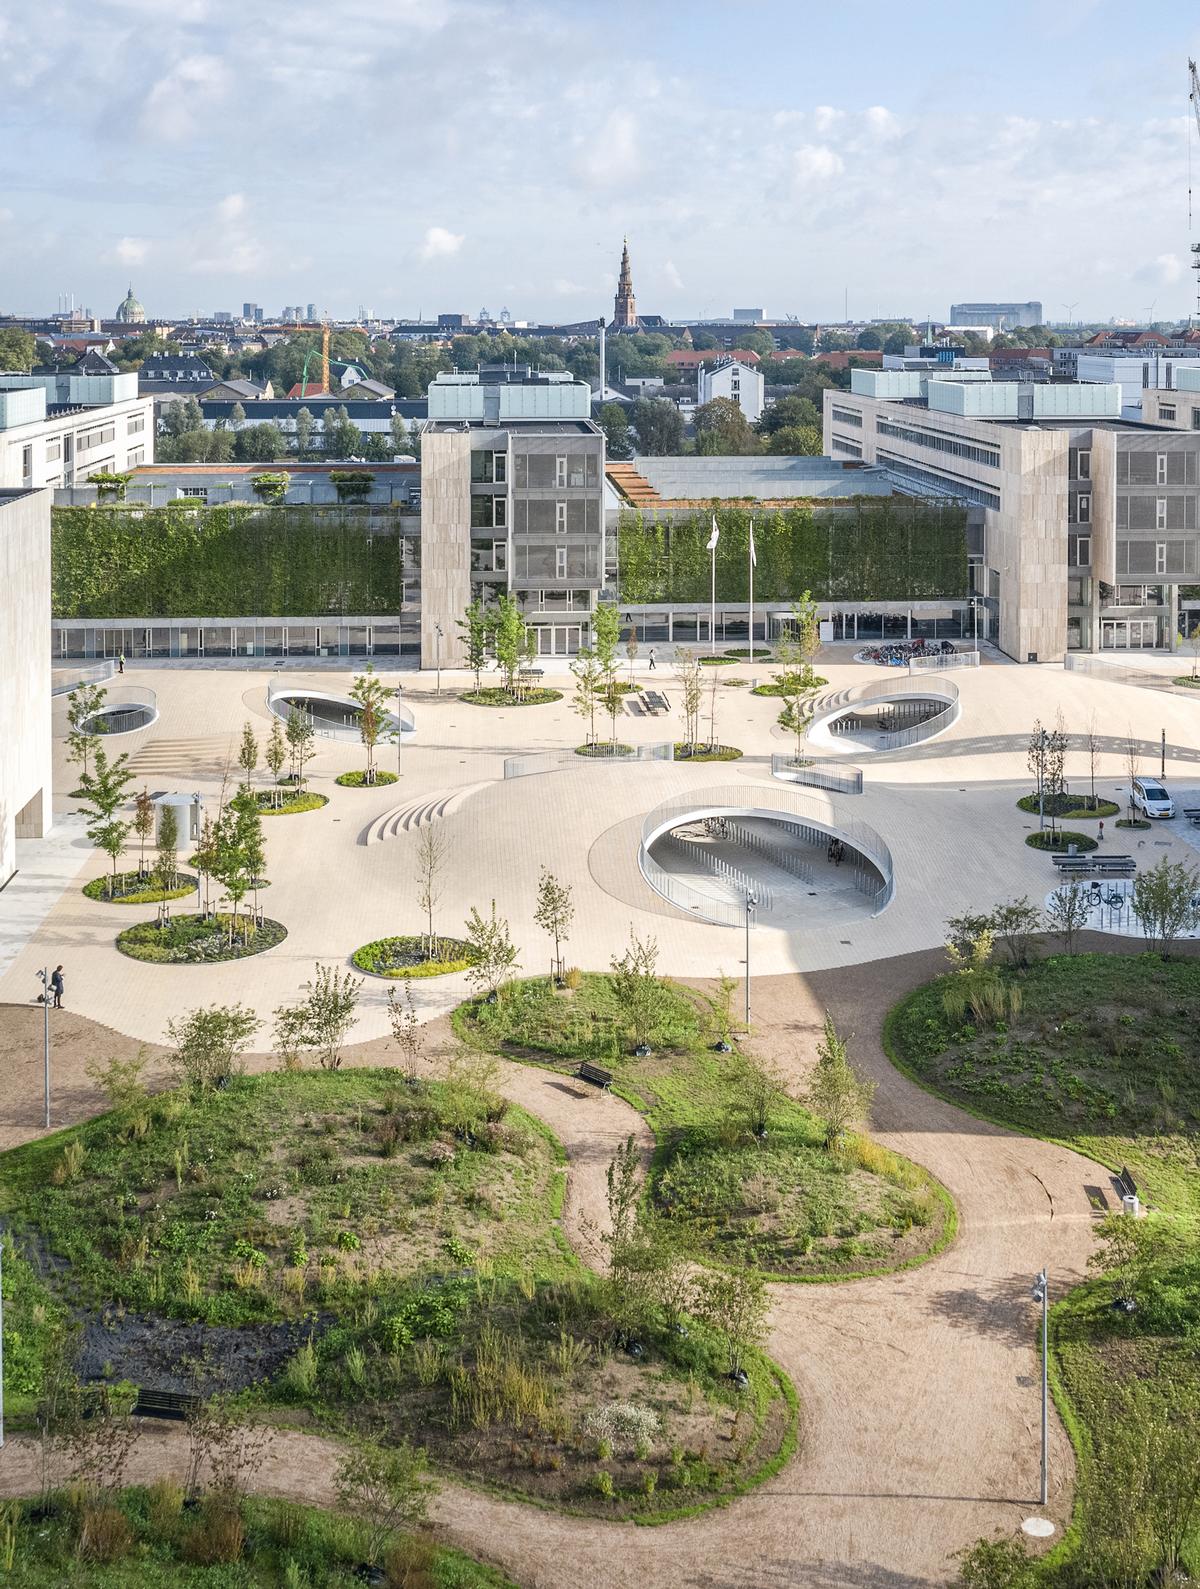 The square combines spaces for sitting and meeting with landscaped beds for trees and plants / Rasmus Hjortshøj - COAST